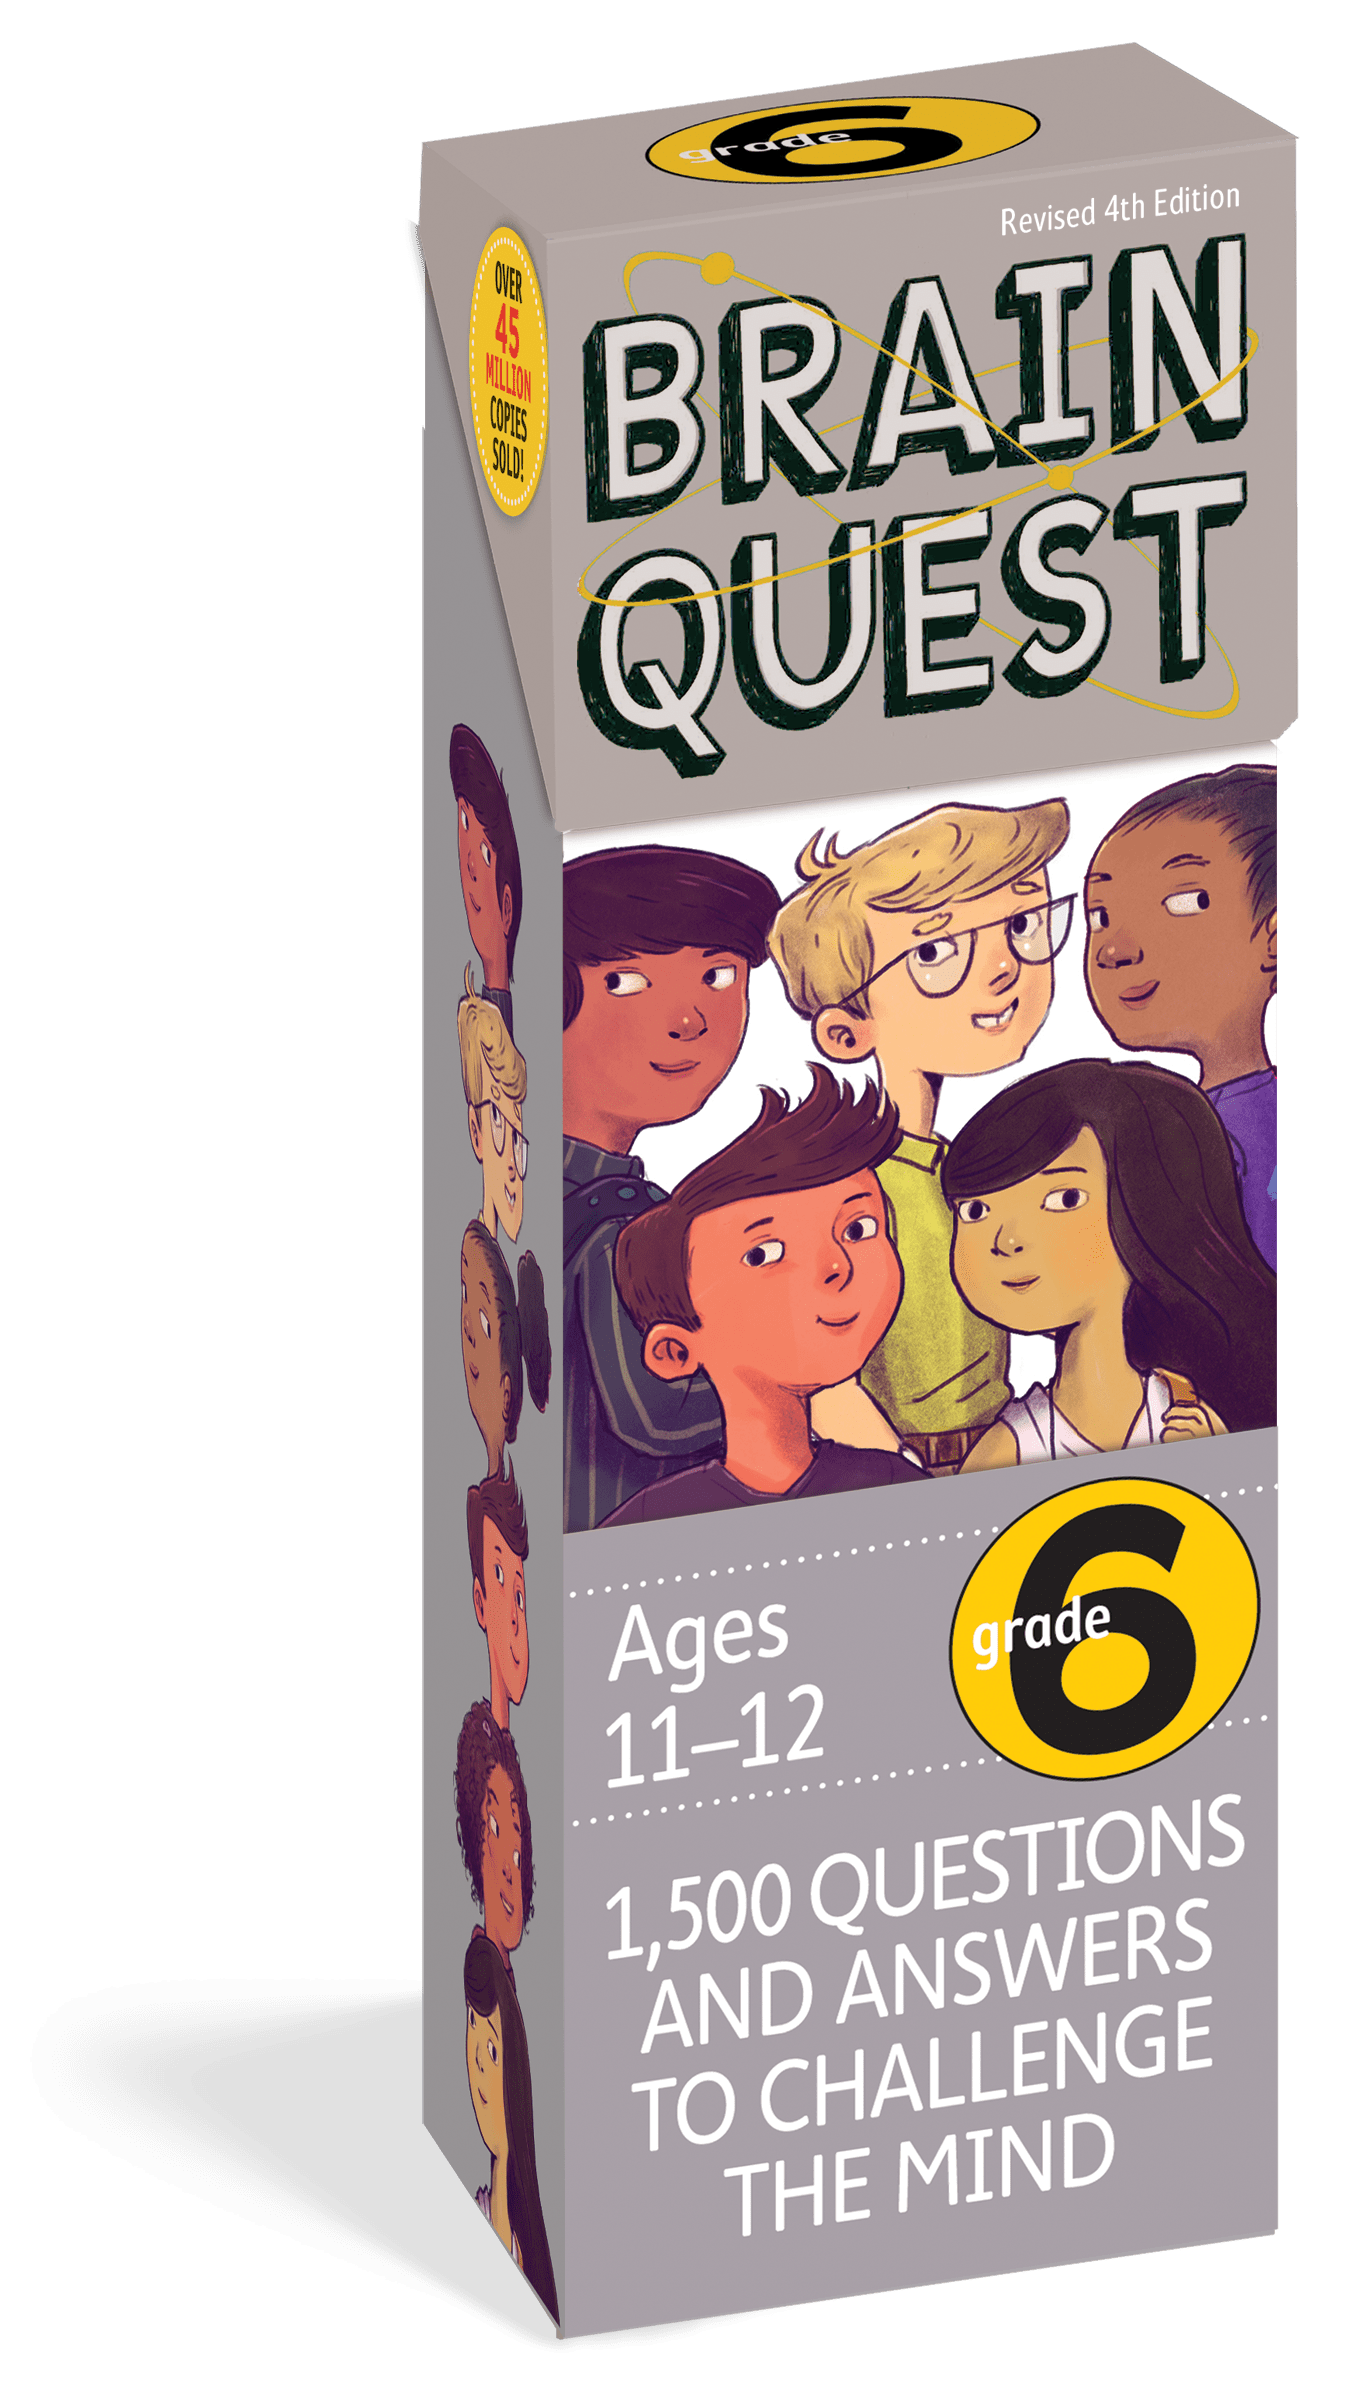 Brain Quest Grade 6, revised 4th edition - Jashanmal Home